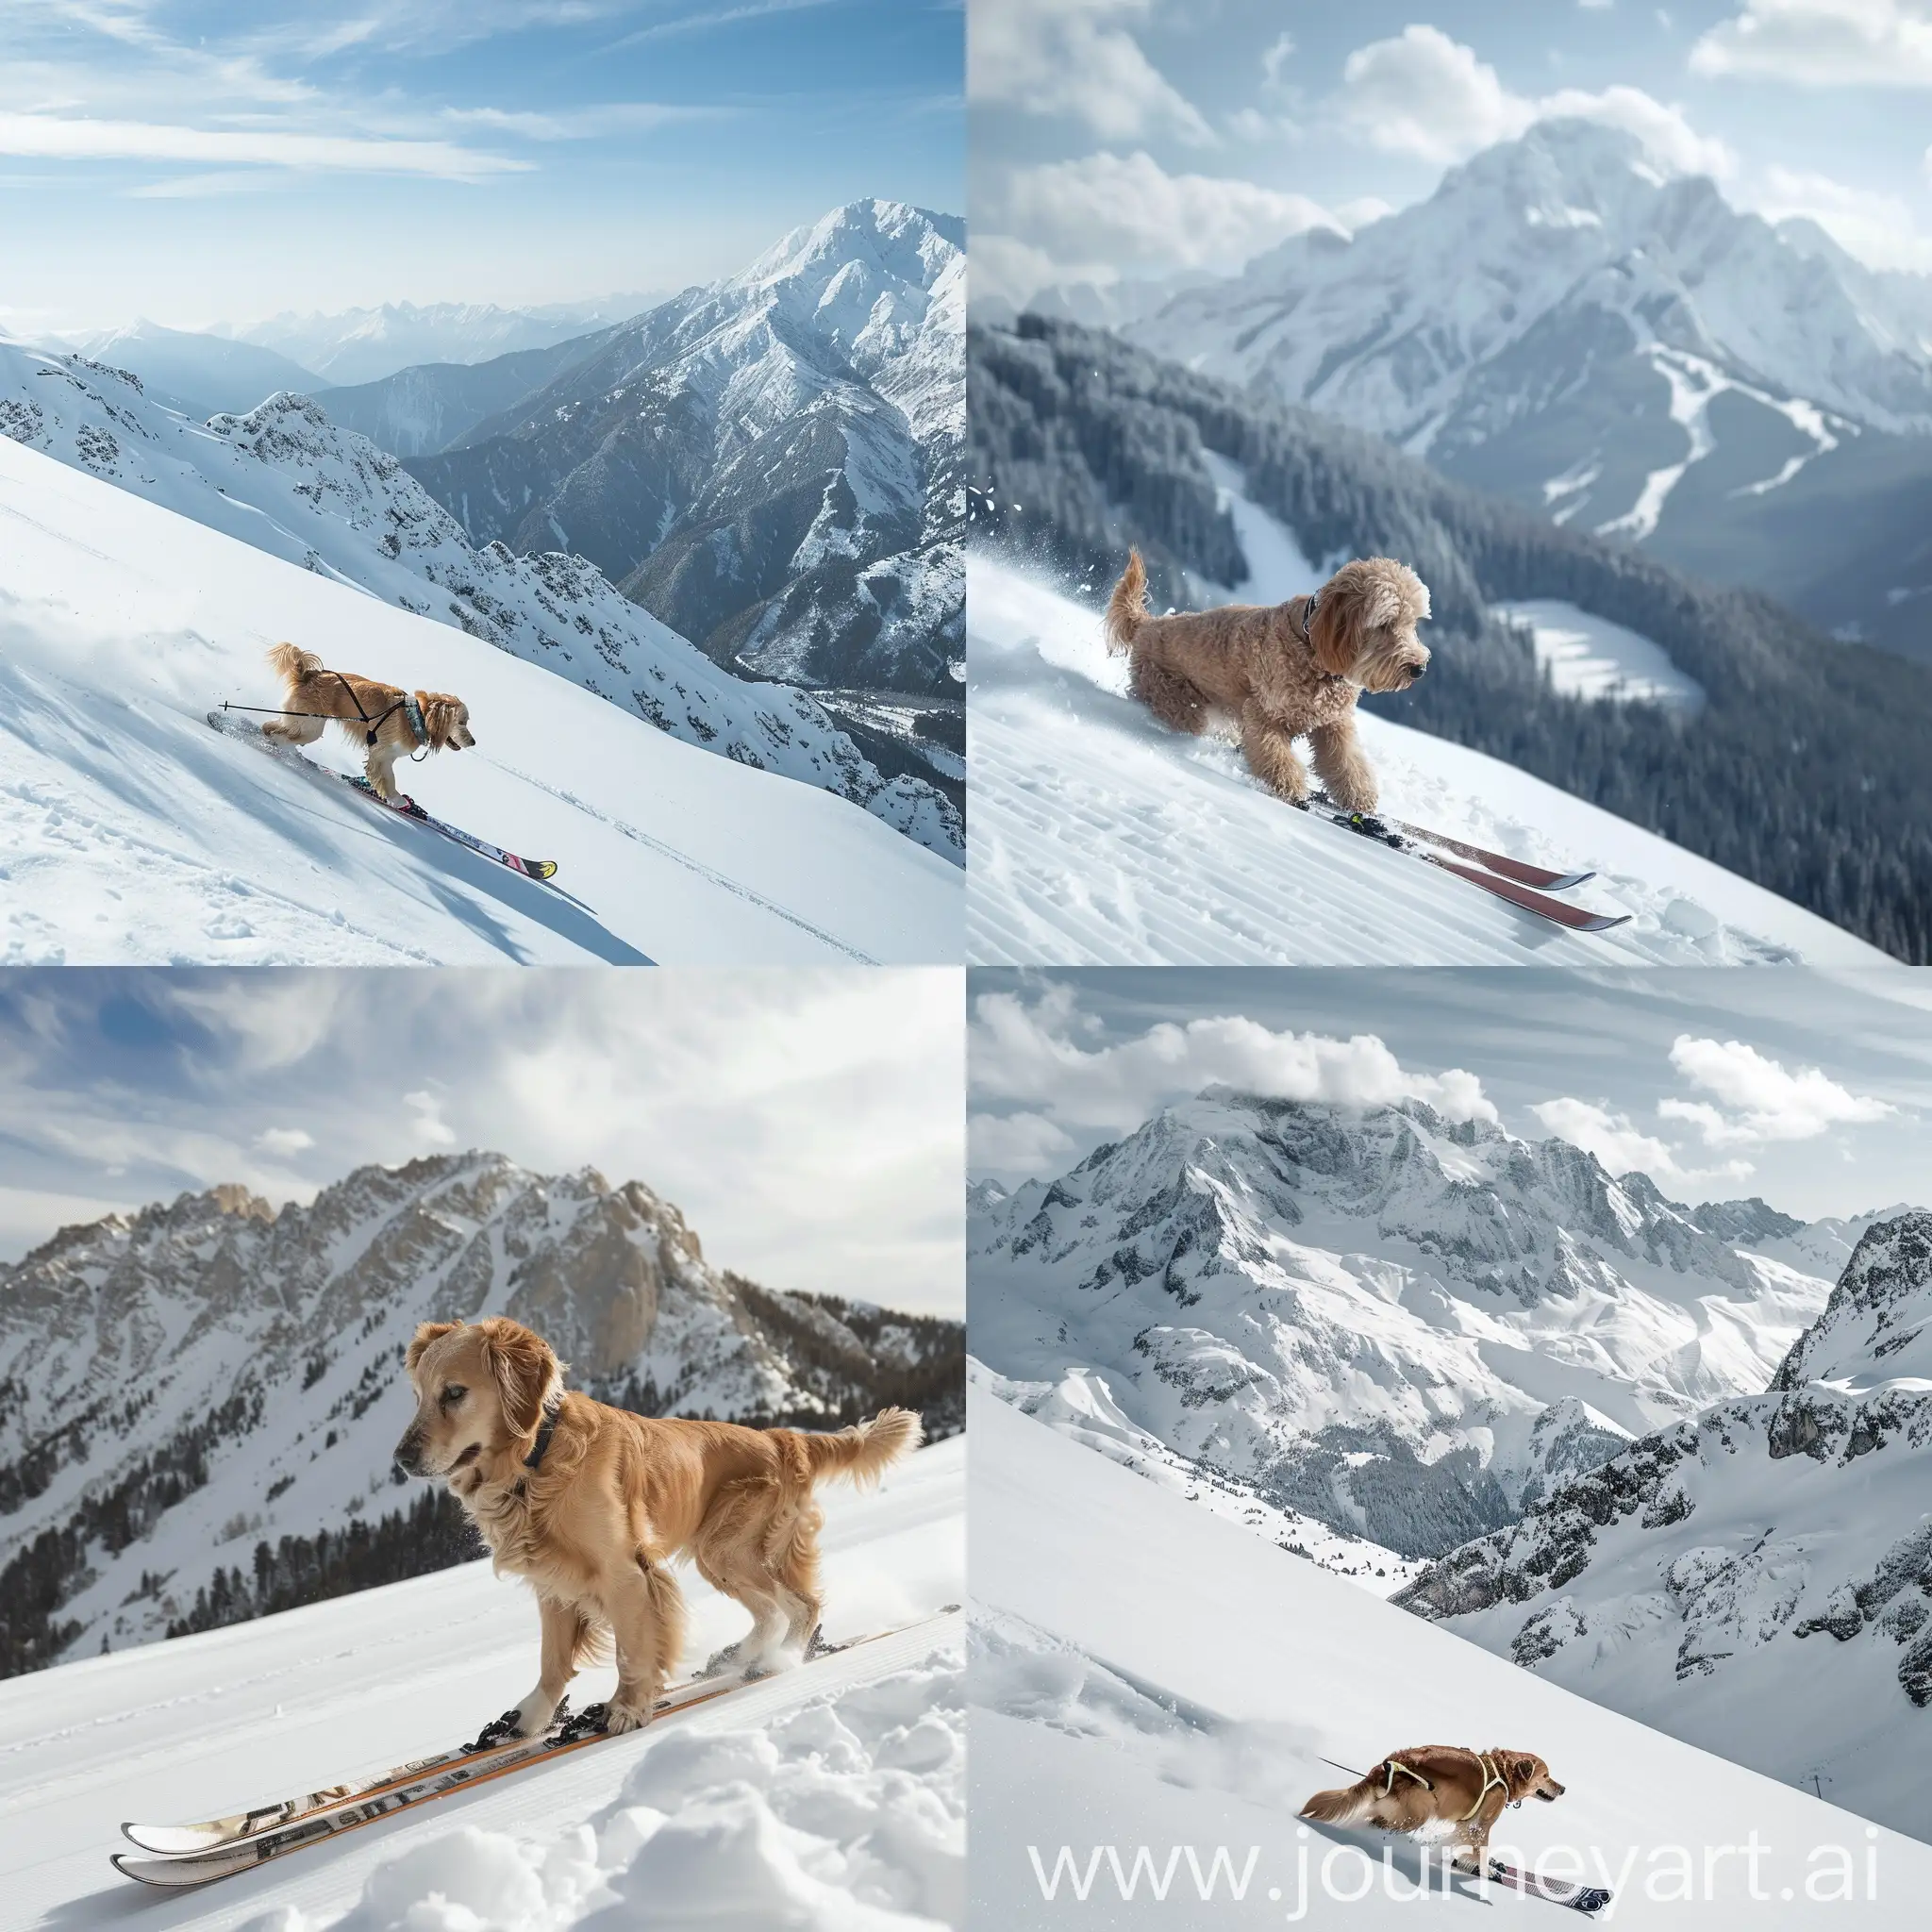 A dog skiing on a snowy mountain, the dog is a bit clumsy and almost falls down